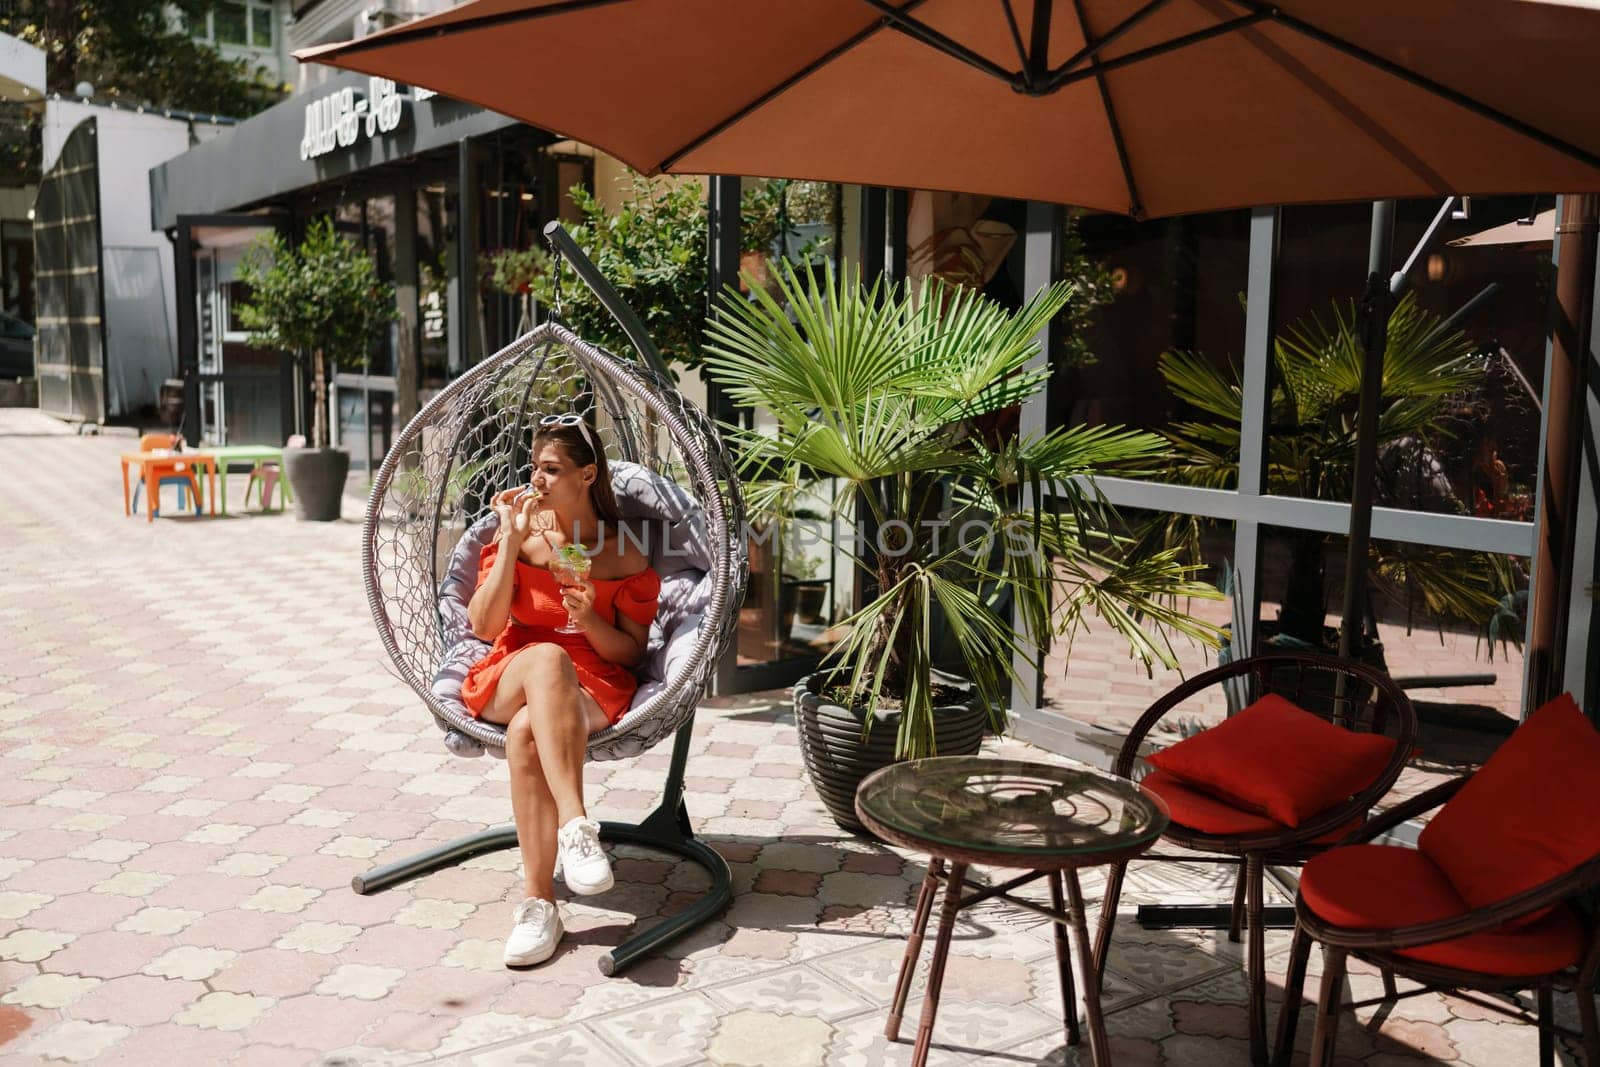 A woman is sitting in a hammock on a patio. The patio is surrounded by potted plants and has a few chairs and tables. The woman is drinking a beverage and she is enjoying her time